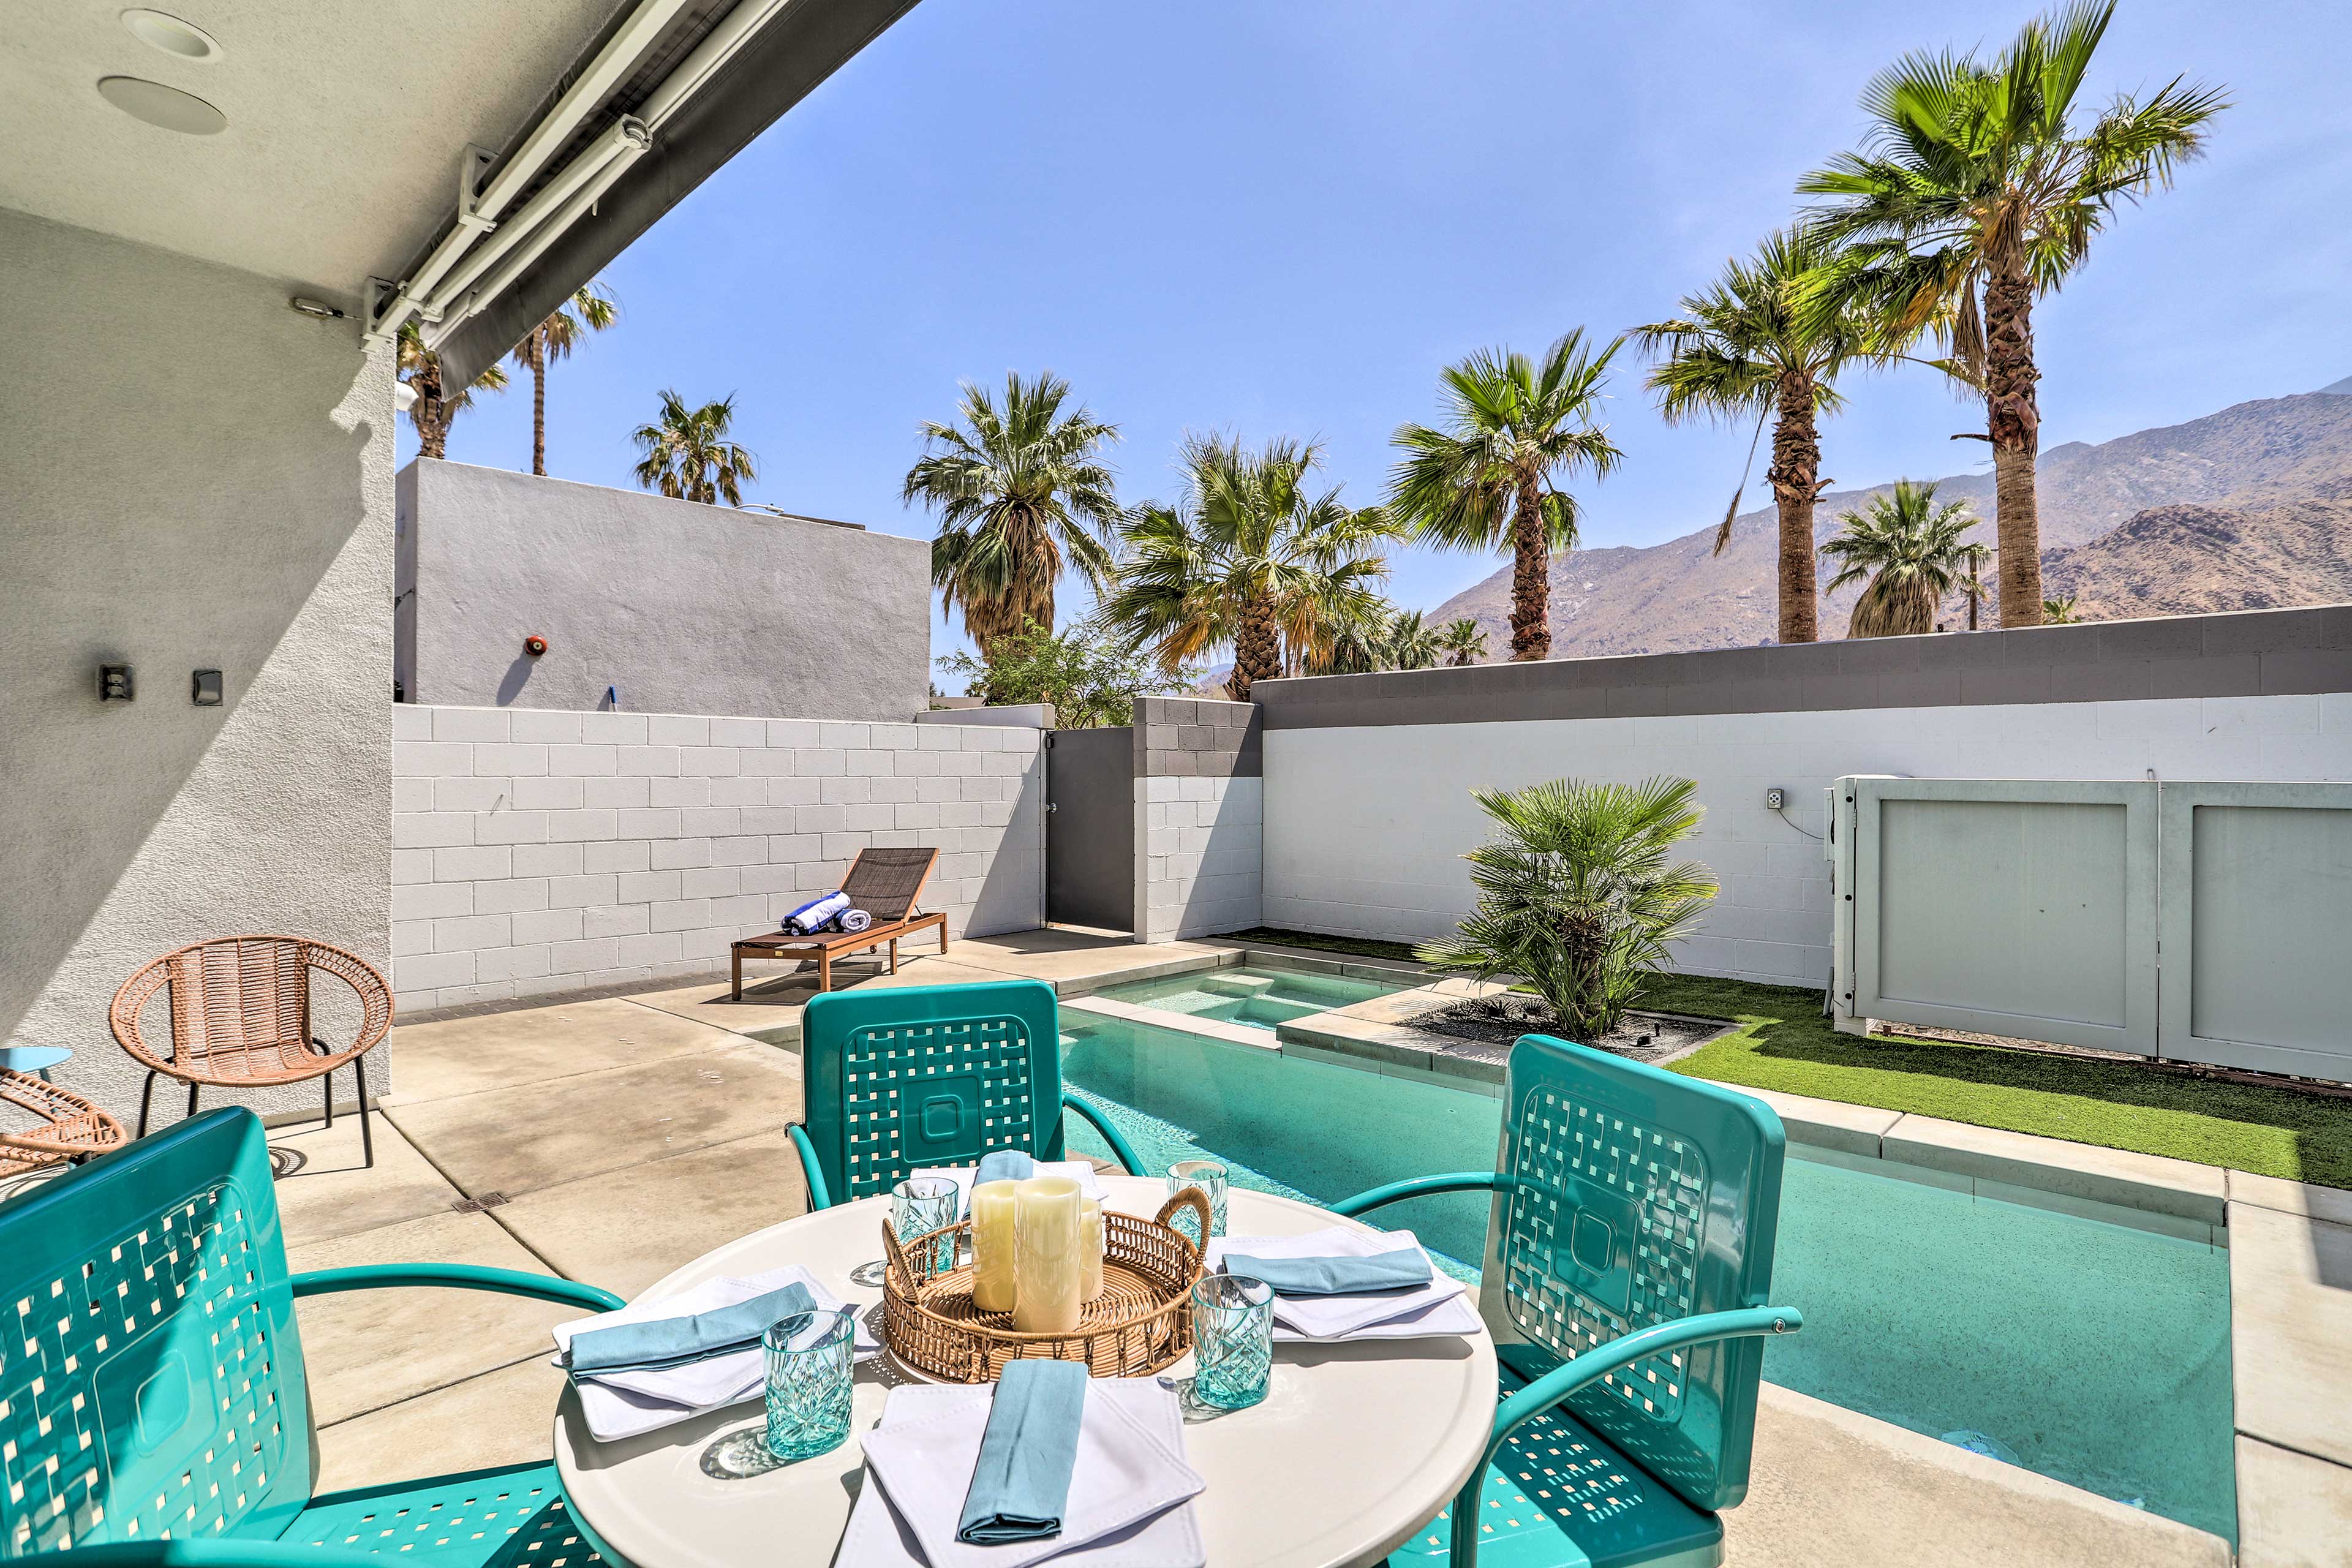 Palm Springs Vacation Rental | 3BR | 3.5BA | 1,945 Sq Ft | Step-Free Entrance